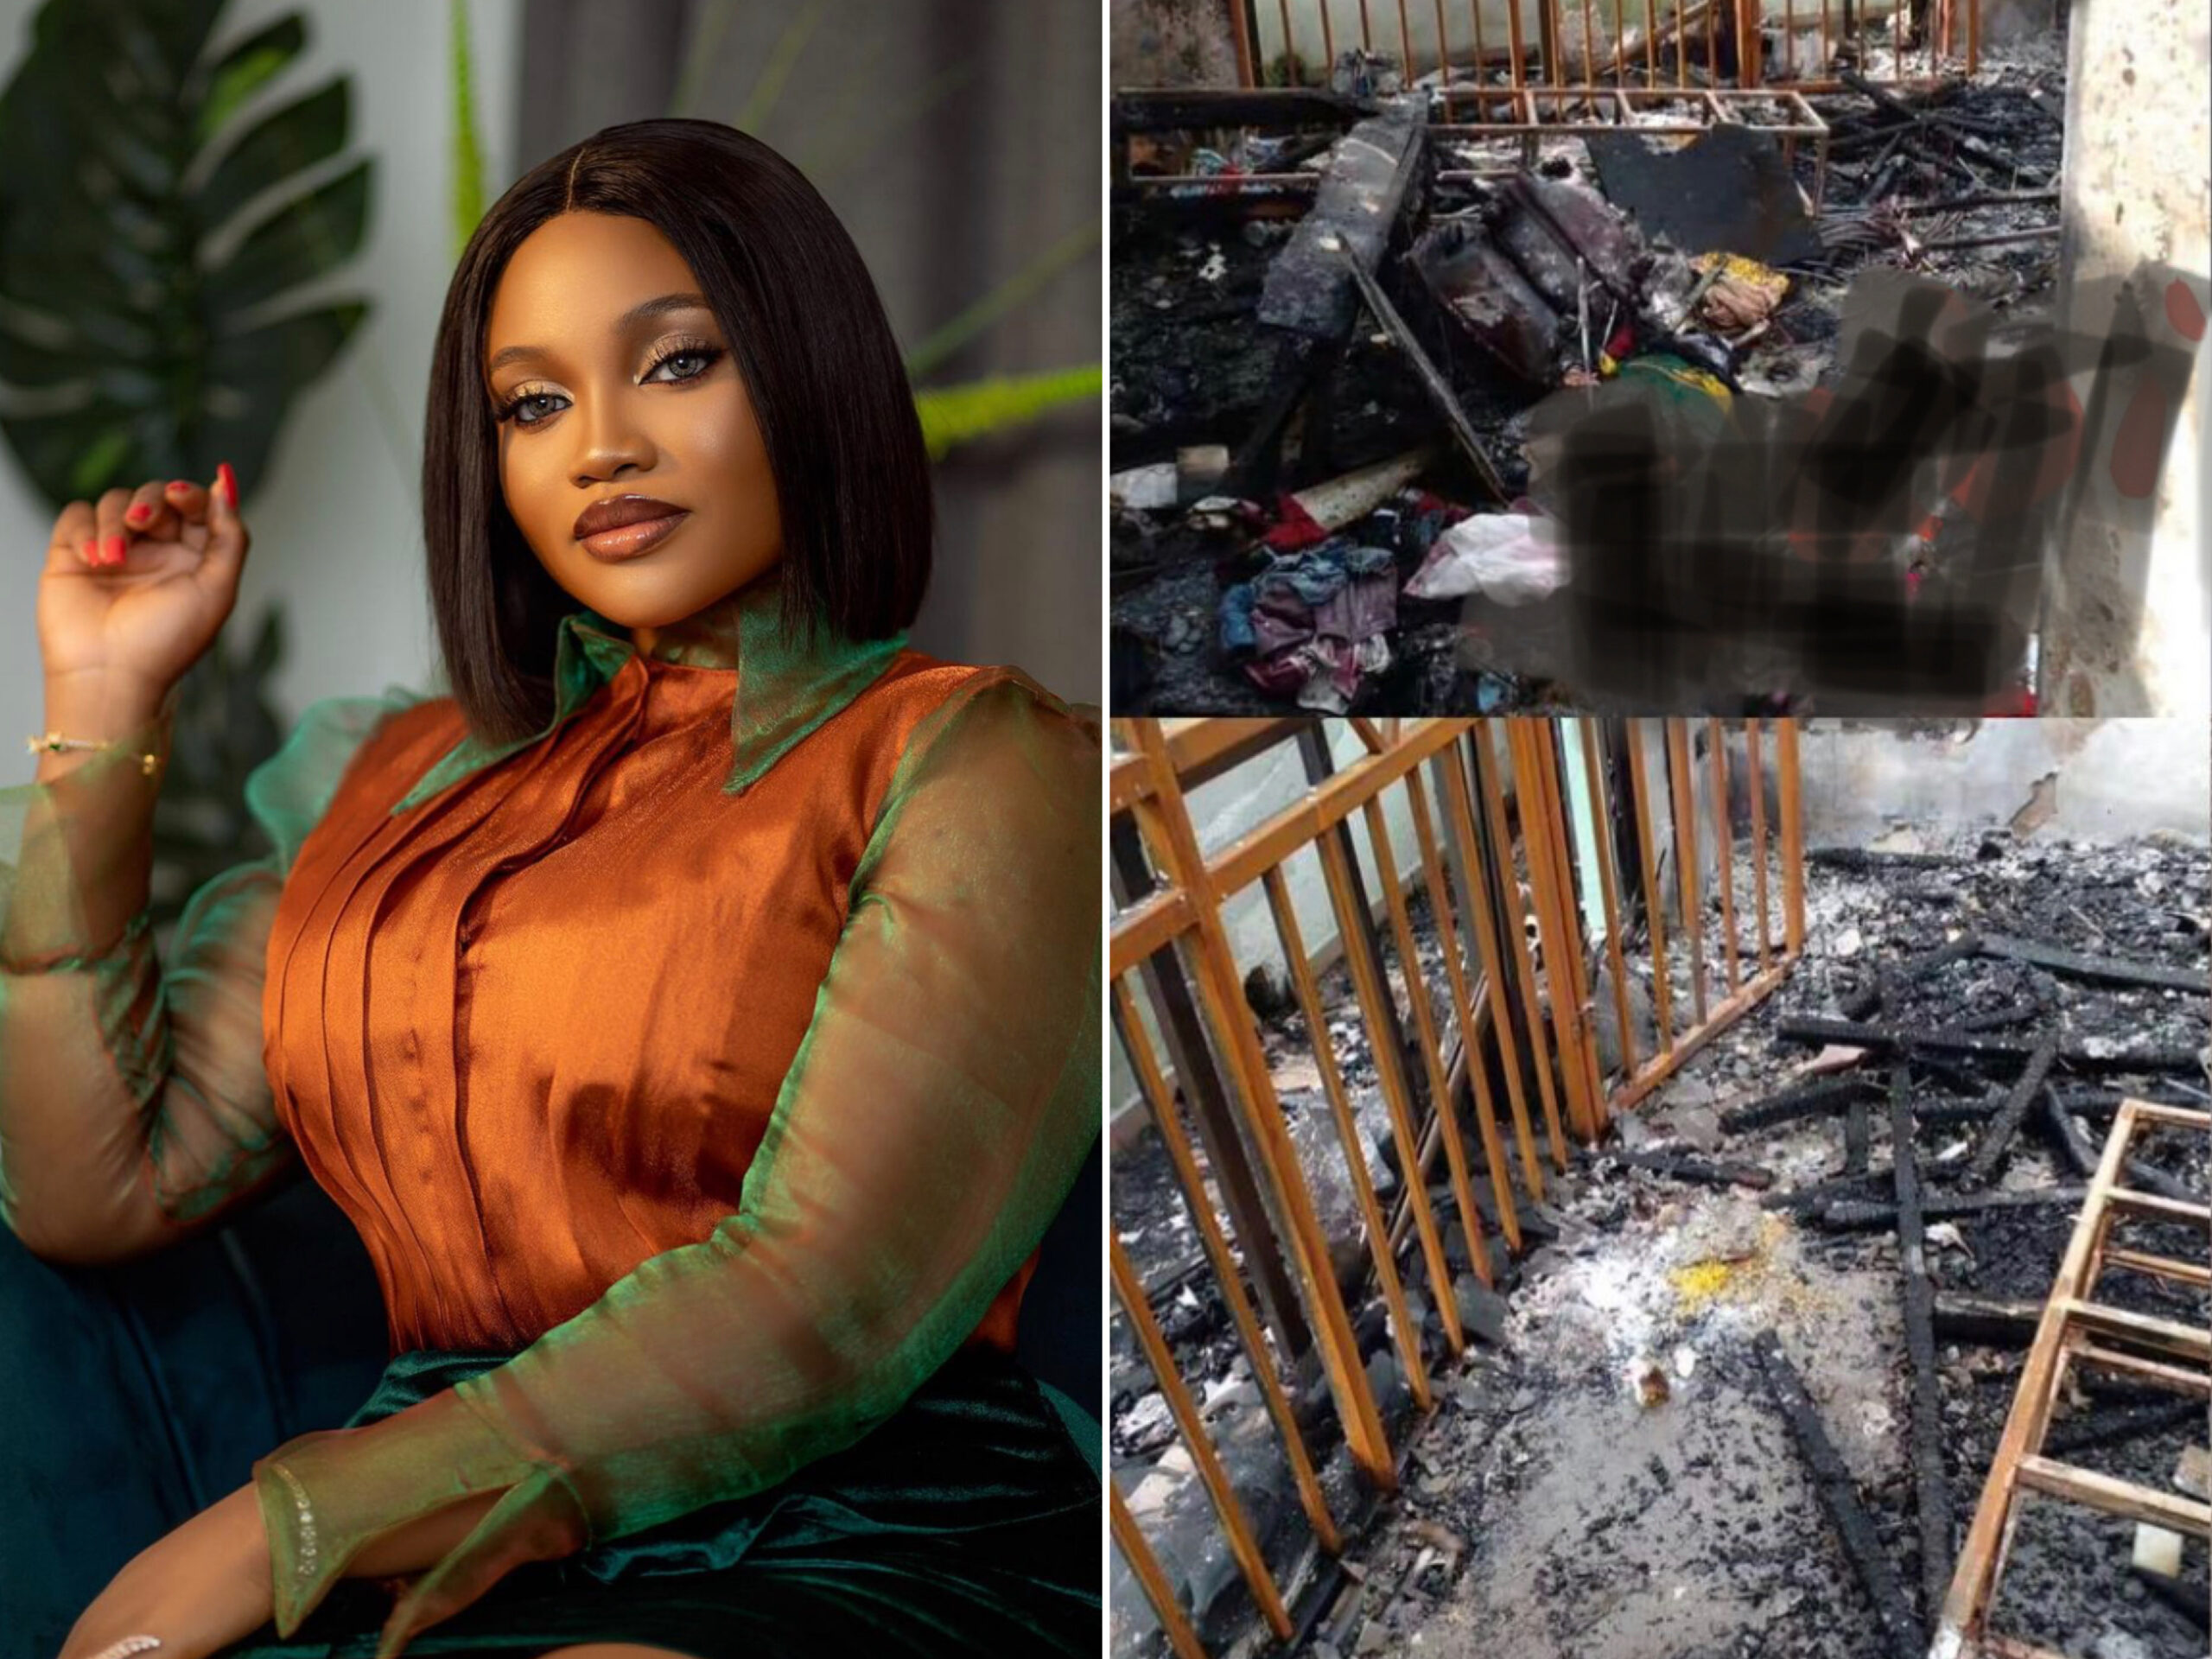 BBNaija’s JMK Confirms Fire Incident, Slams Those Accusing Her Of Chasing Clout